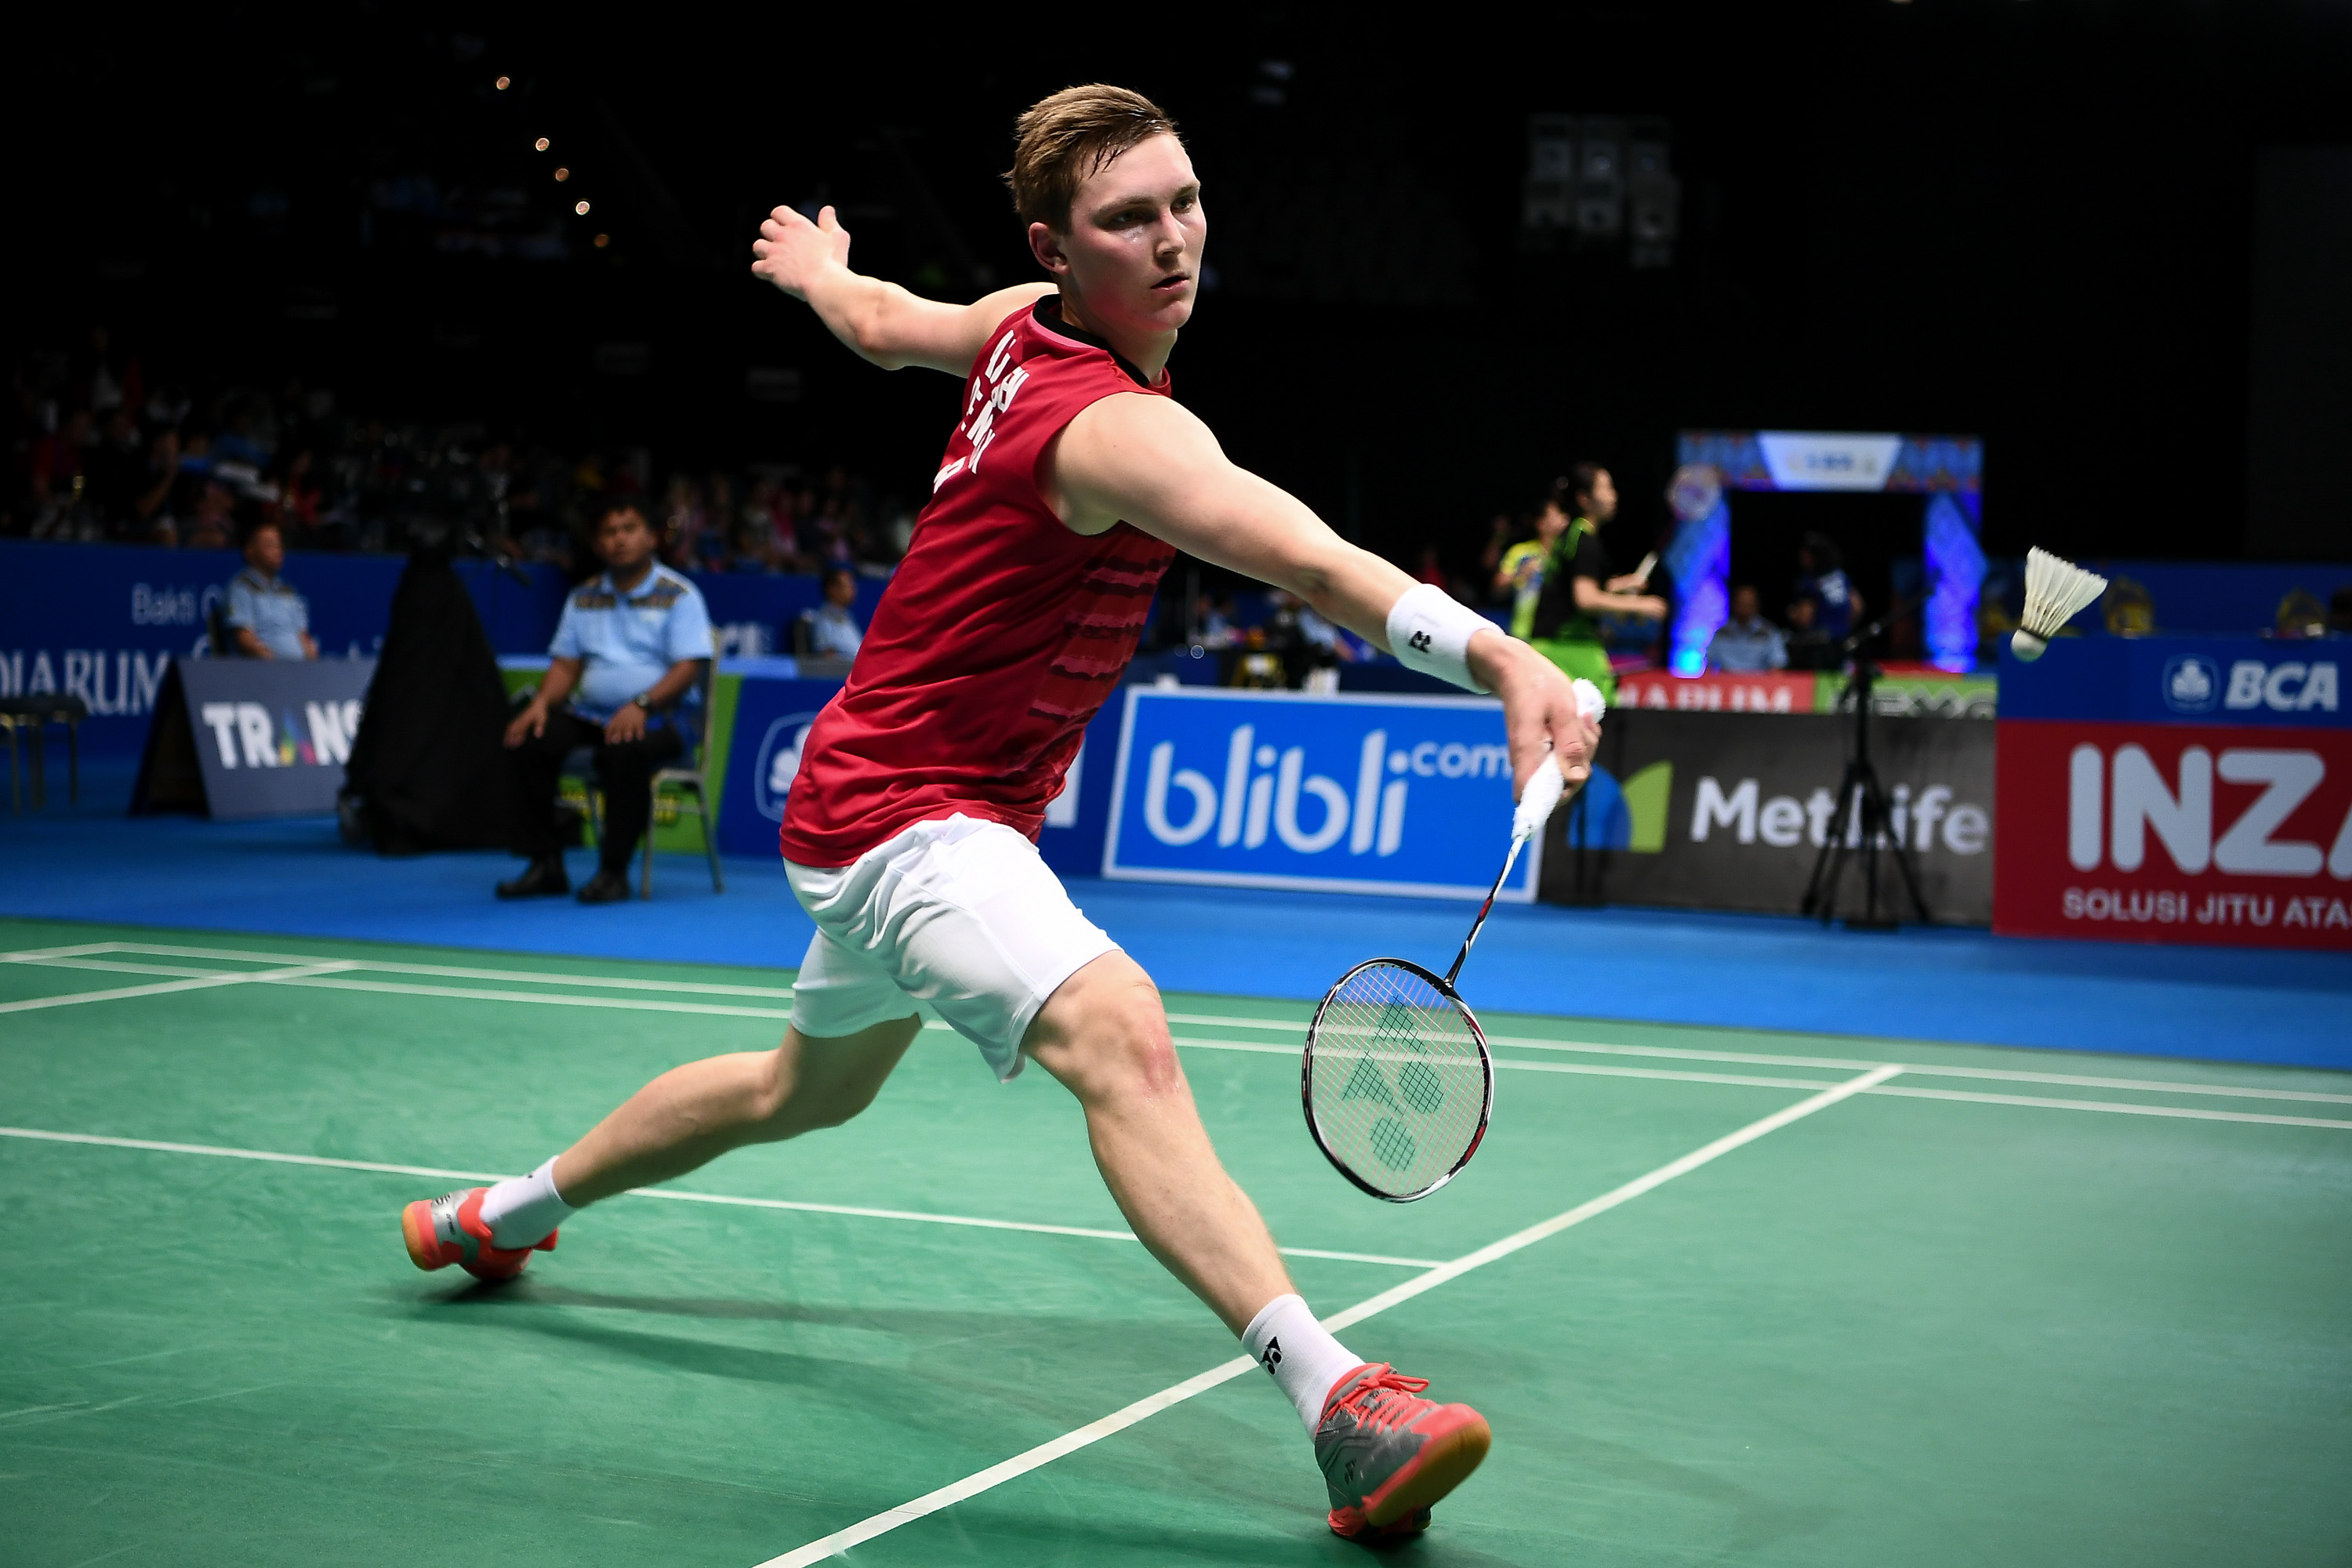 All England Open Viktor Axelsen pulls out due to ankle injury